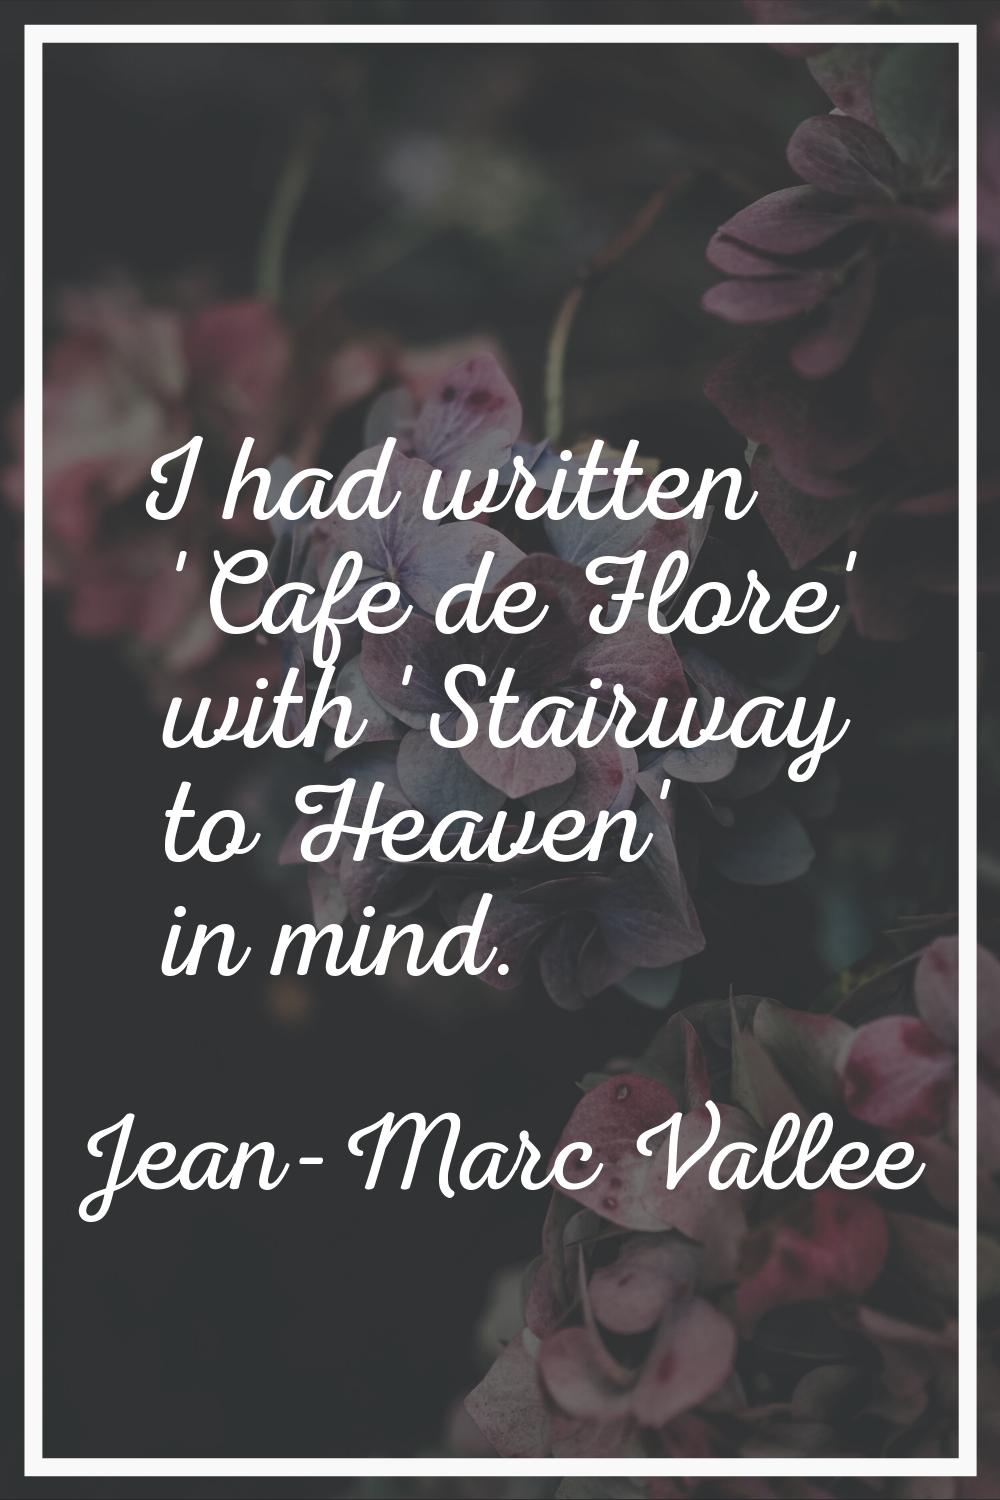 I had written 'Cafe de Flore' with 'Stairway to Heaven' in mind.